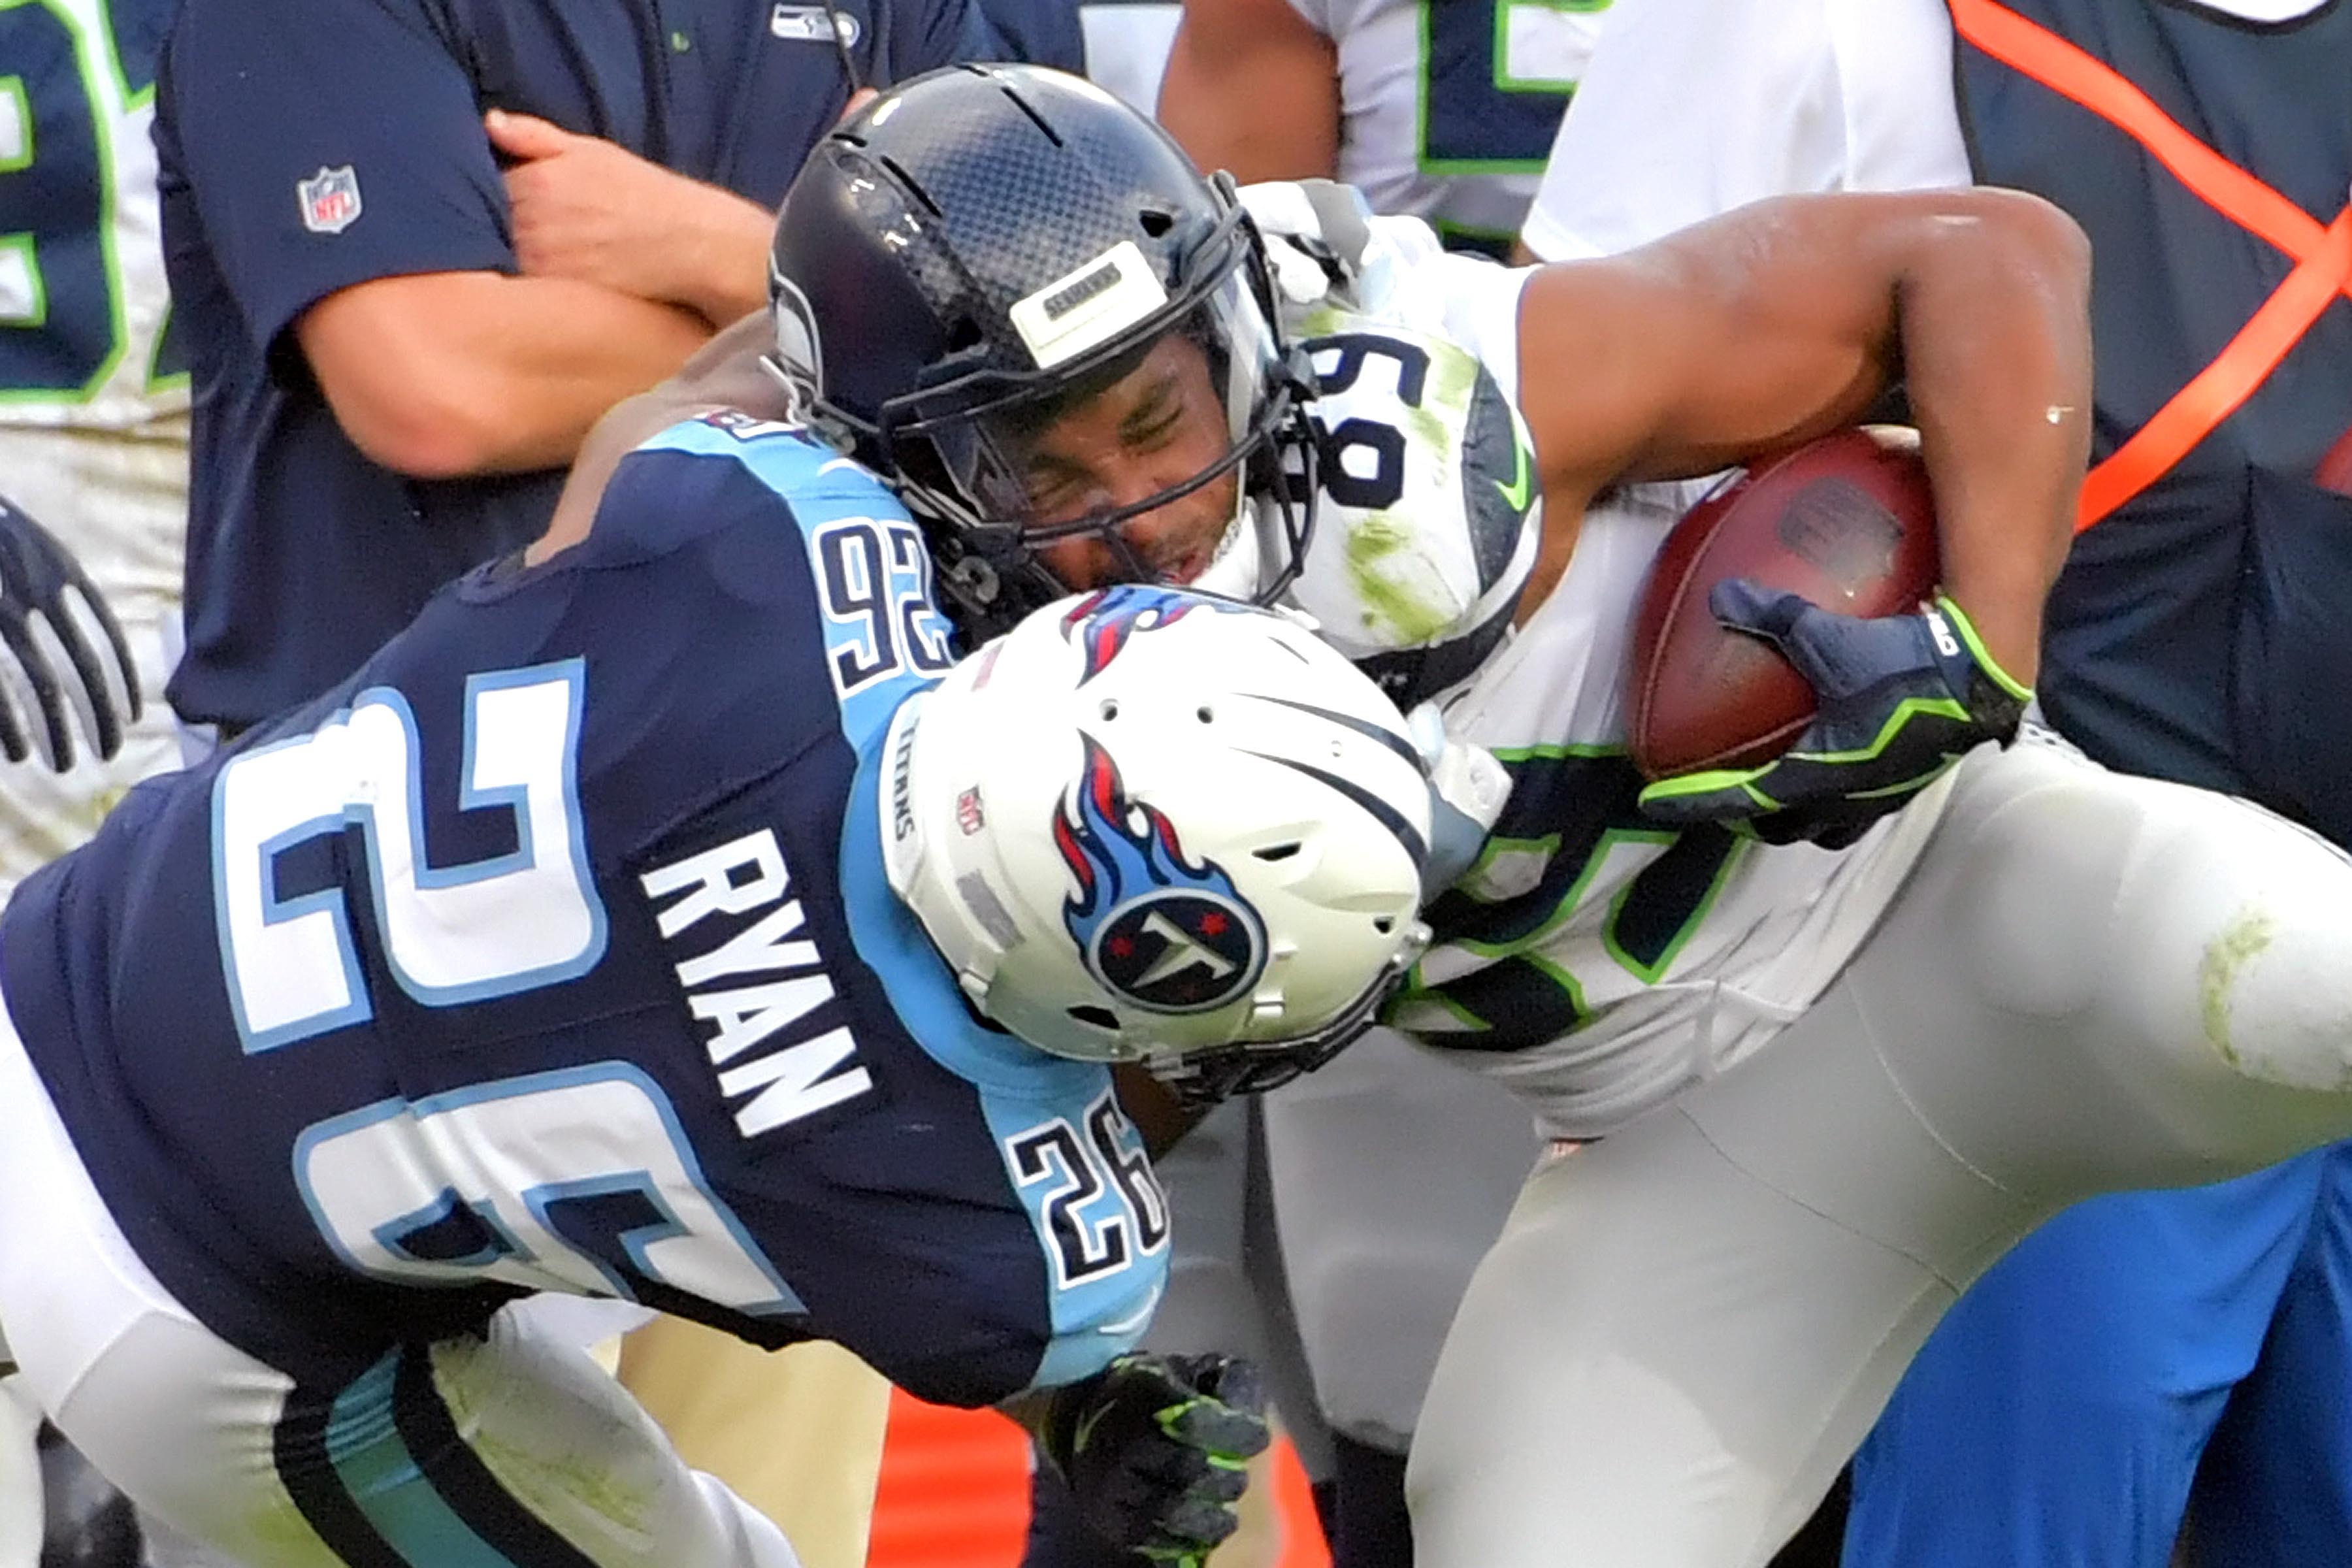 NFL: Seattle Seahawks at Tennessee Titans